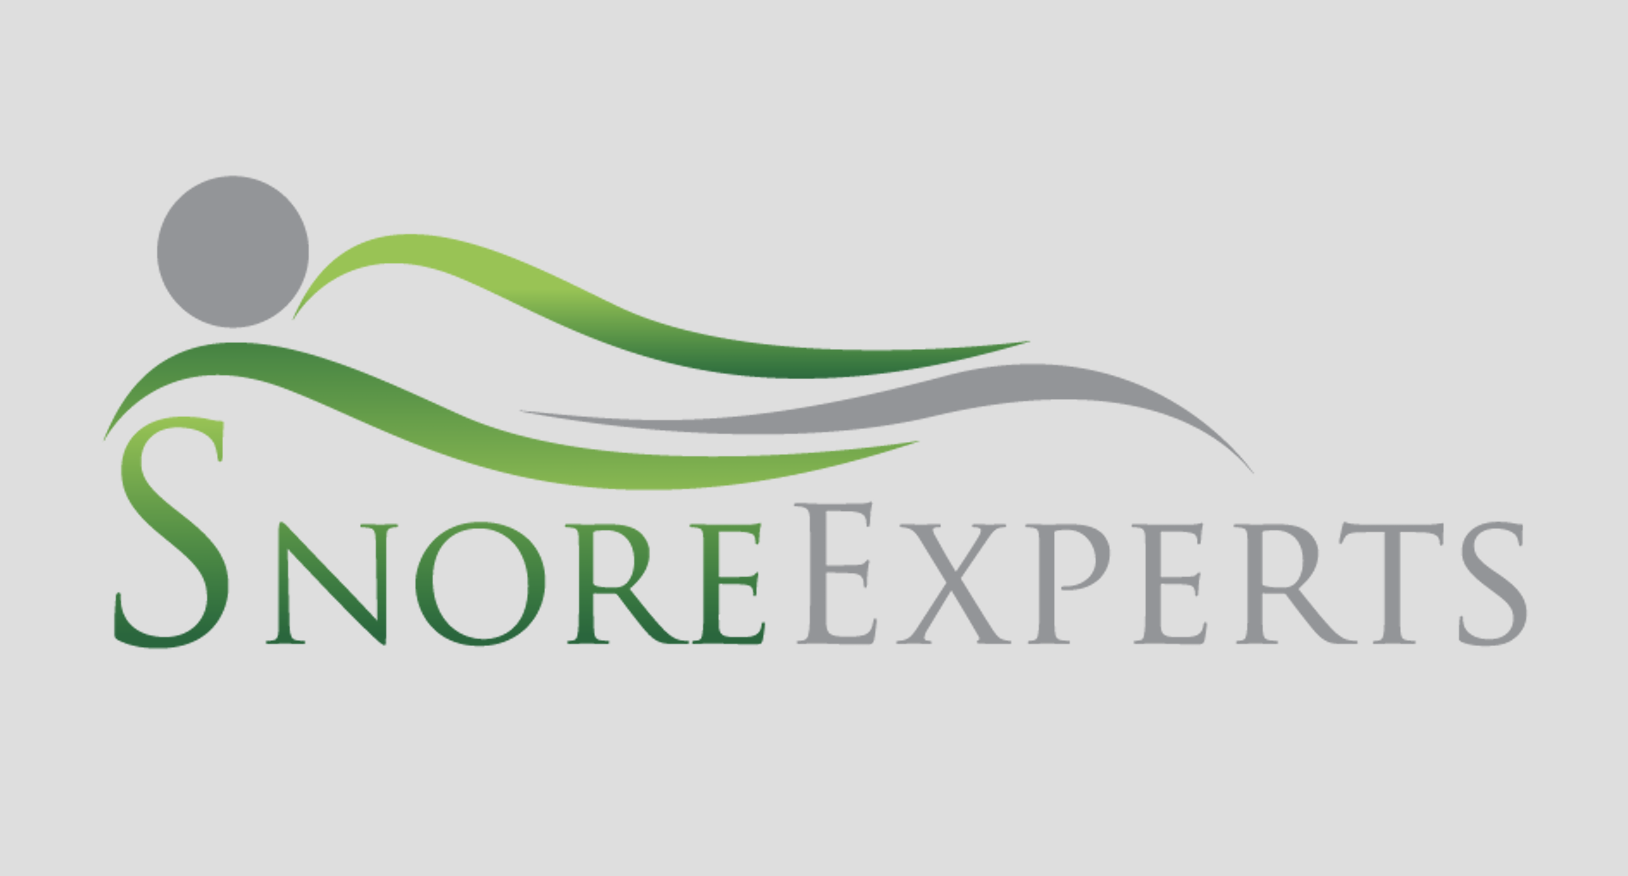 Snore Experts Logo